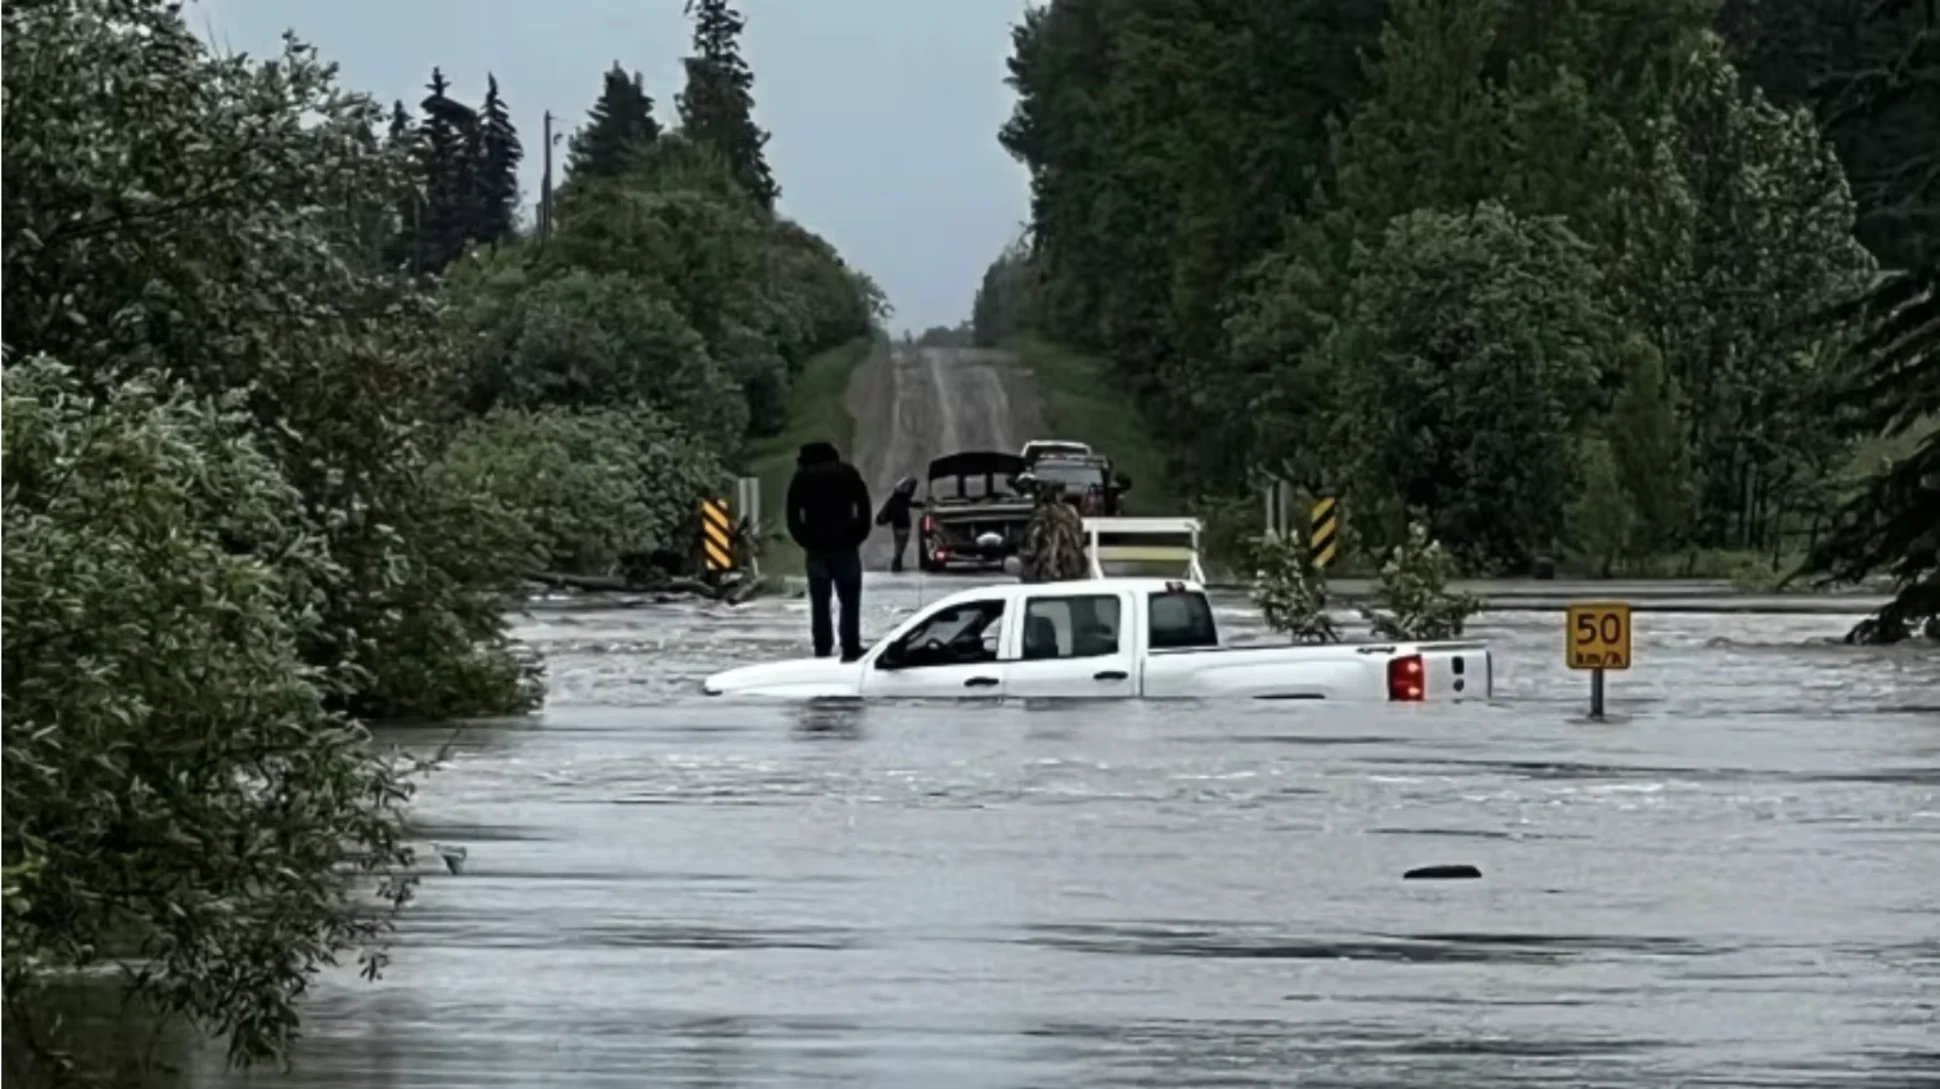 Fire to flood: County west of Edmonton faces new emergency following heavy rains